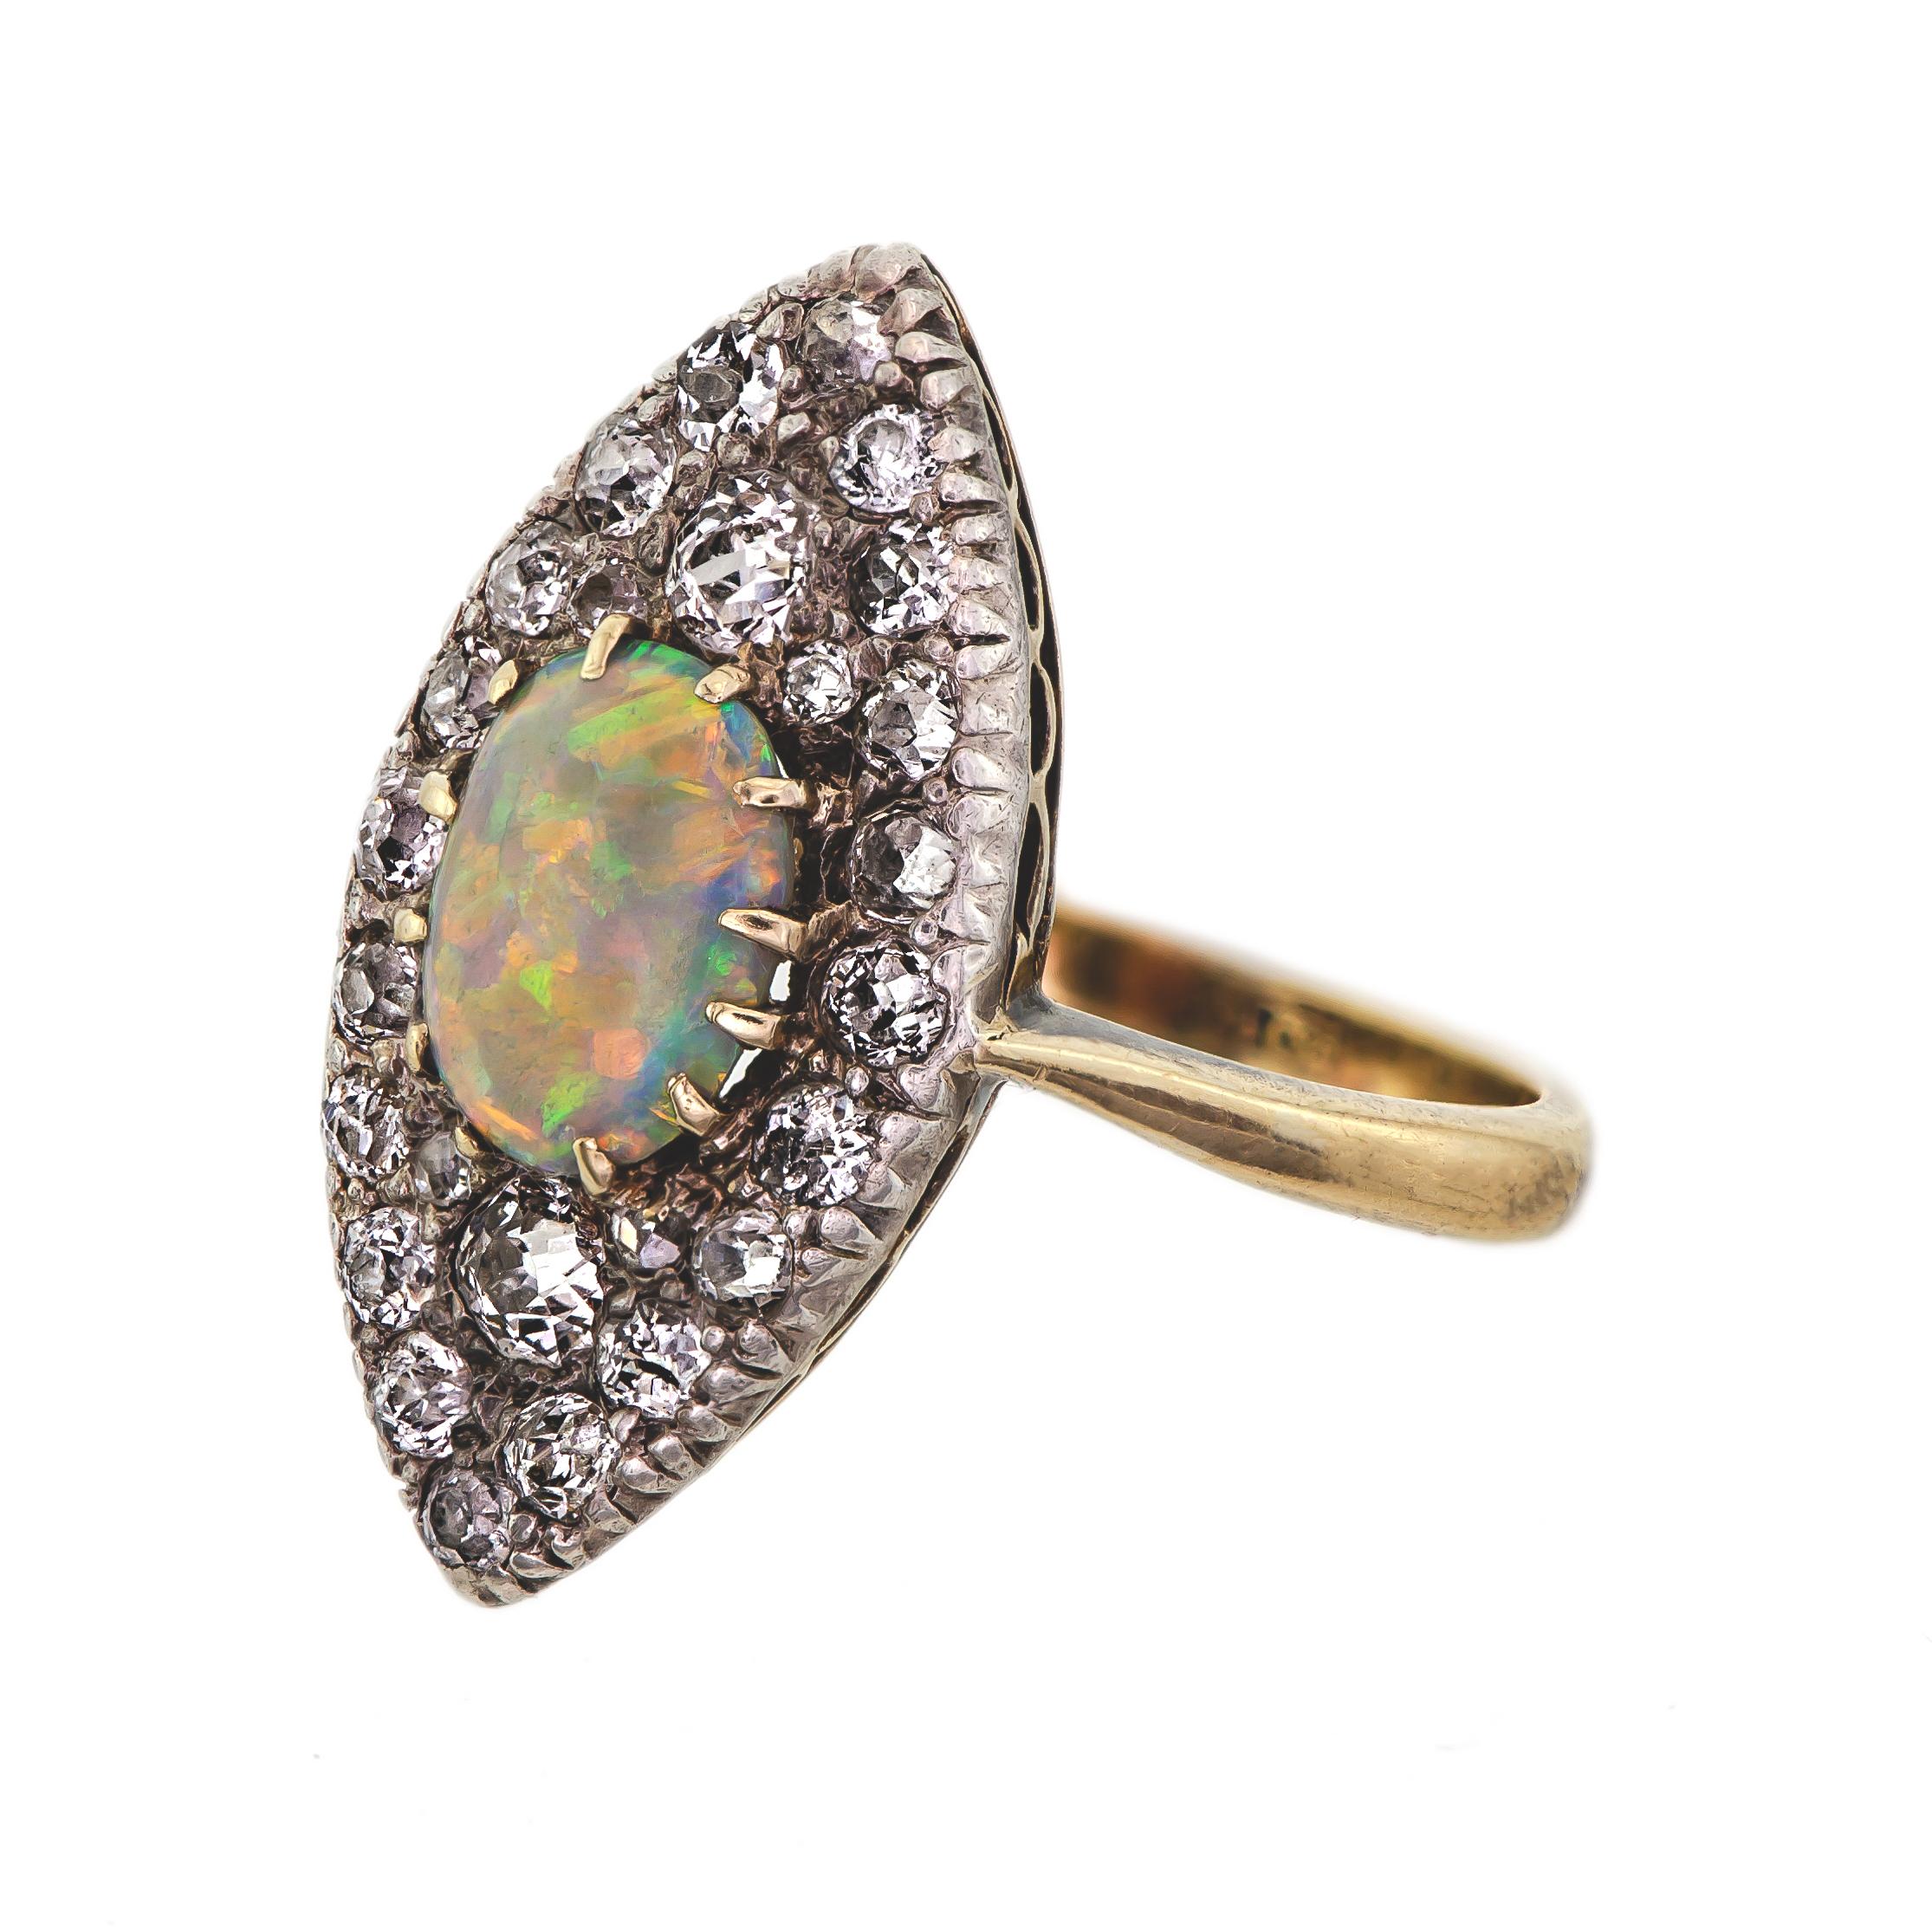 Beautiful Victorian Circa 1890 silver topped yellow gold opal and old mine cut diamond ring navette shaped set with approximately .65 cts total weight plus of chunky old mine cut diamonds surrounding one oval cabochon cut crystal opal.  Beautiful